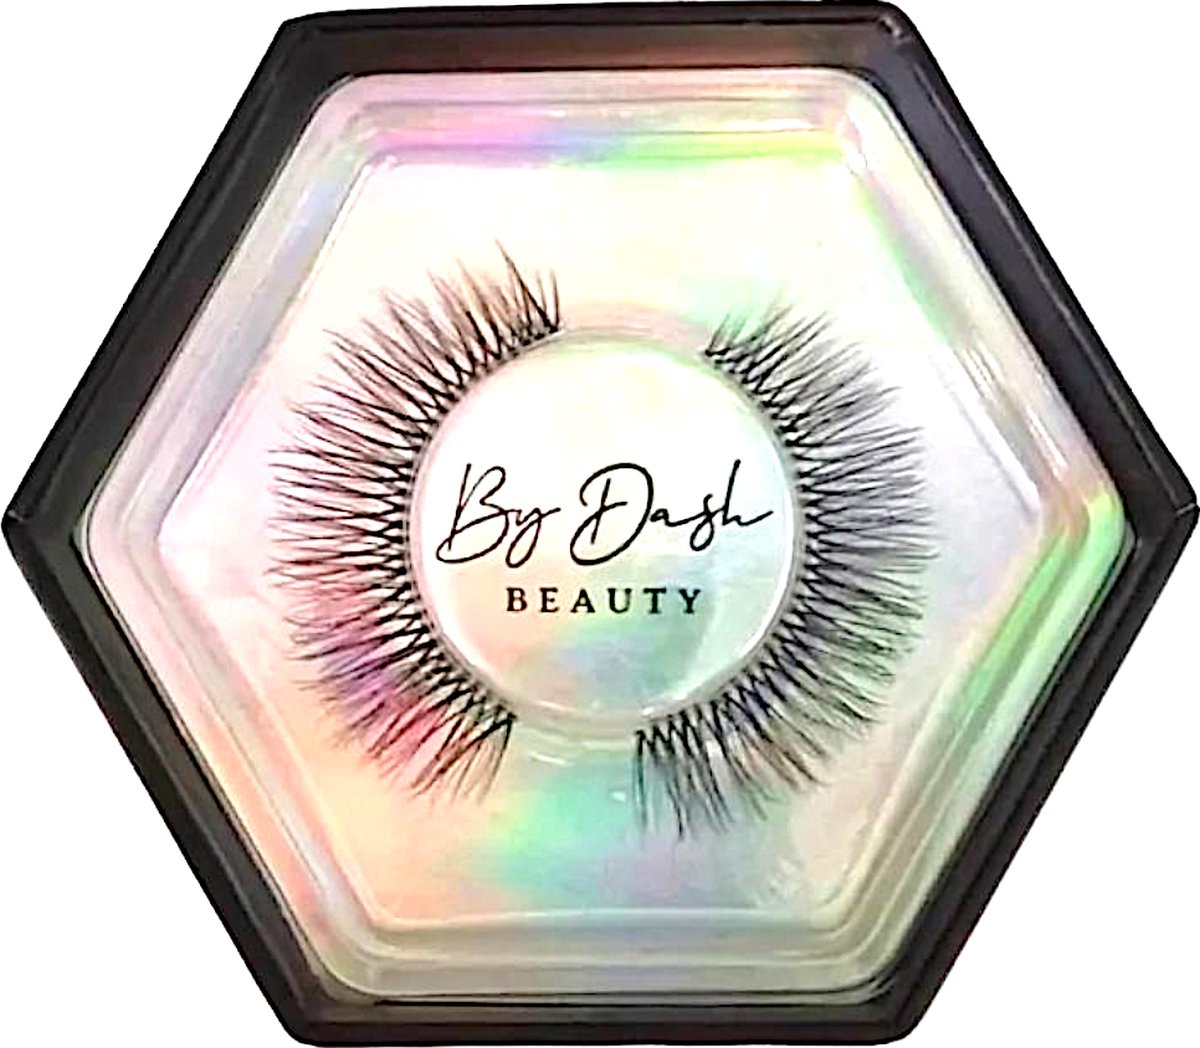 By Dash Beauty - Natural Beauty - Valse Wimpers - Nepwimpers - 3D Faux Mink Lashes - Luxury Lashes